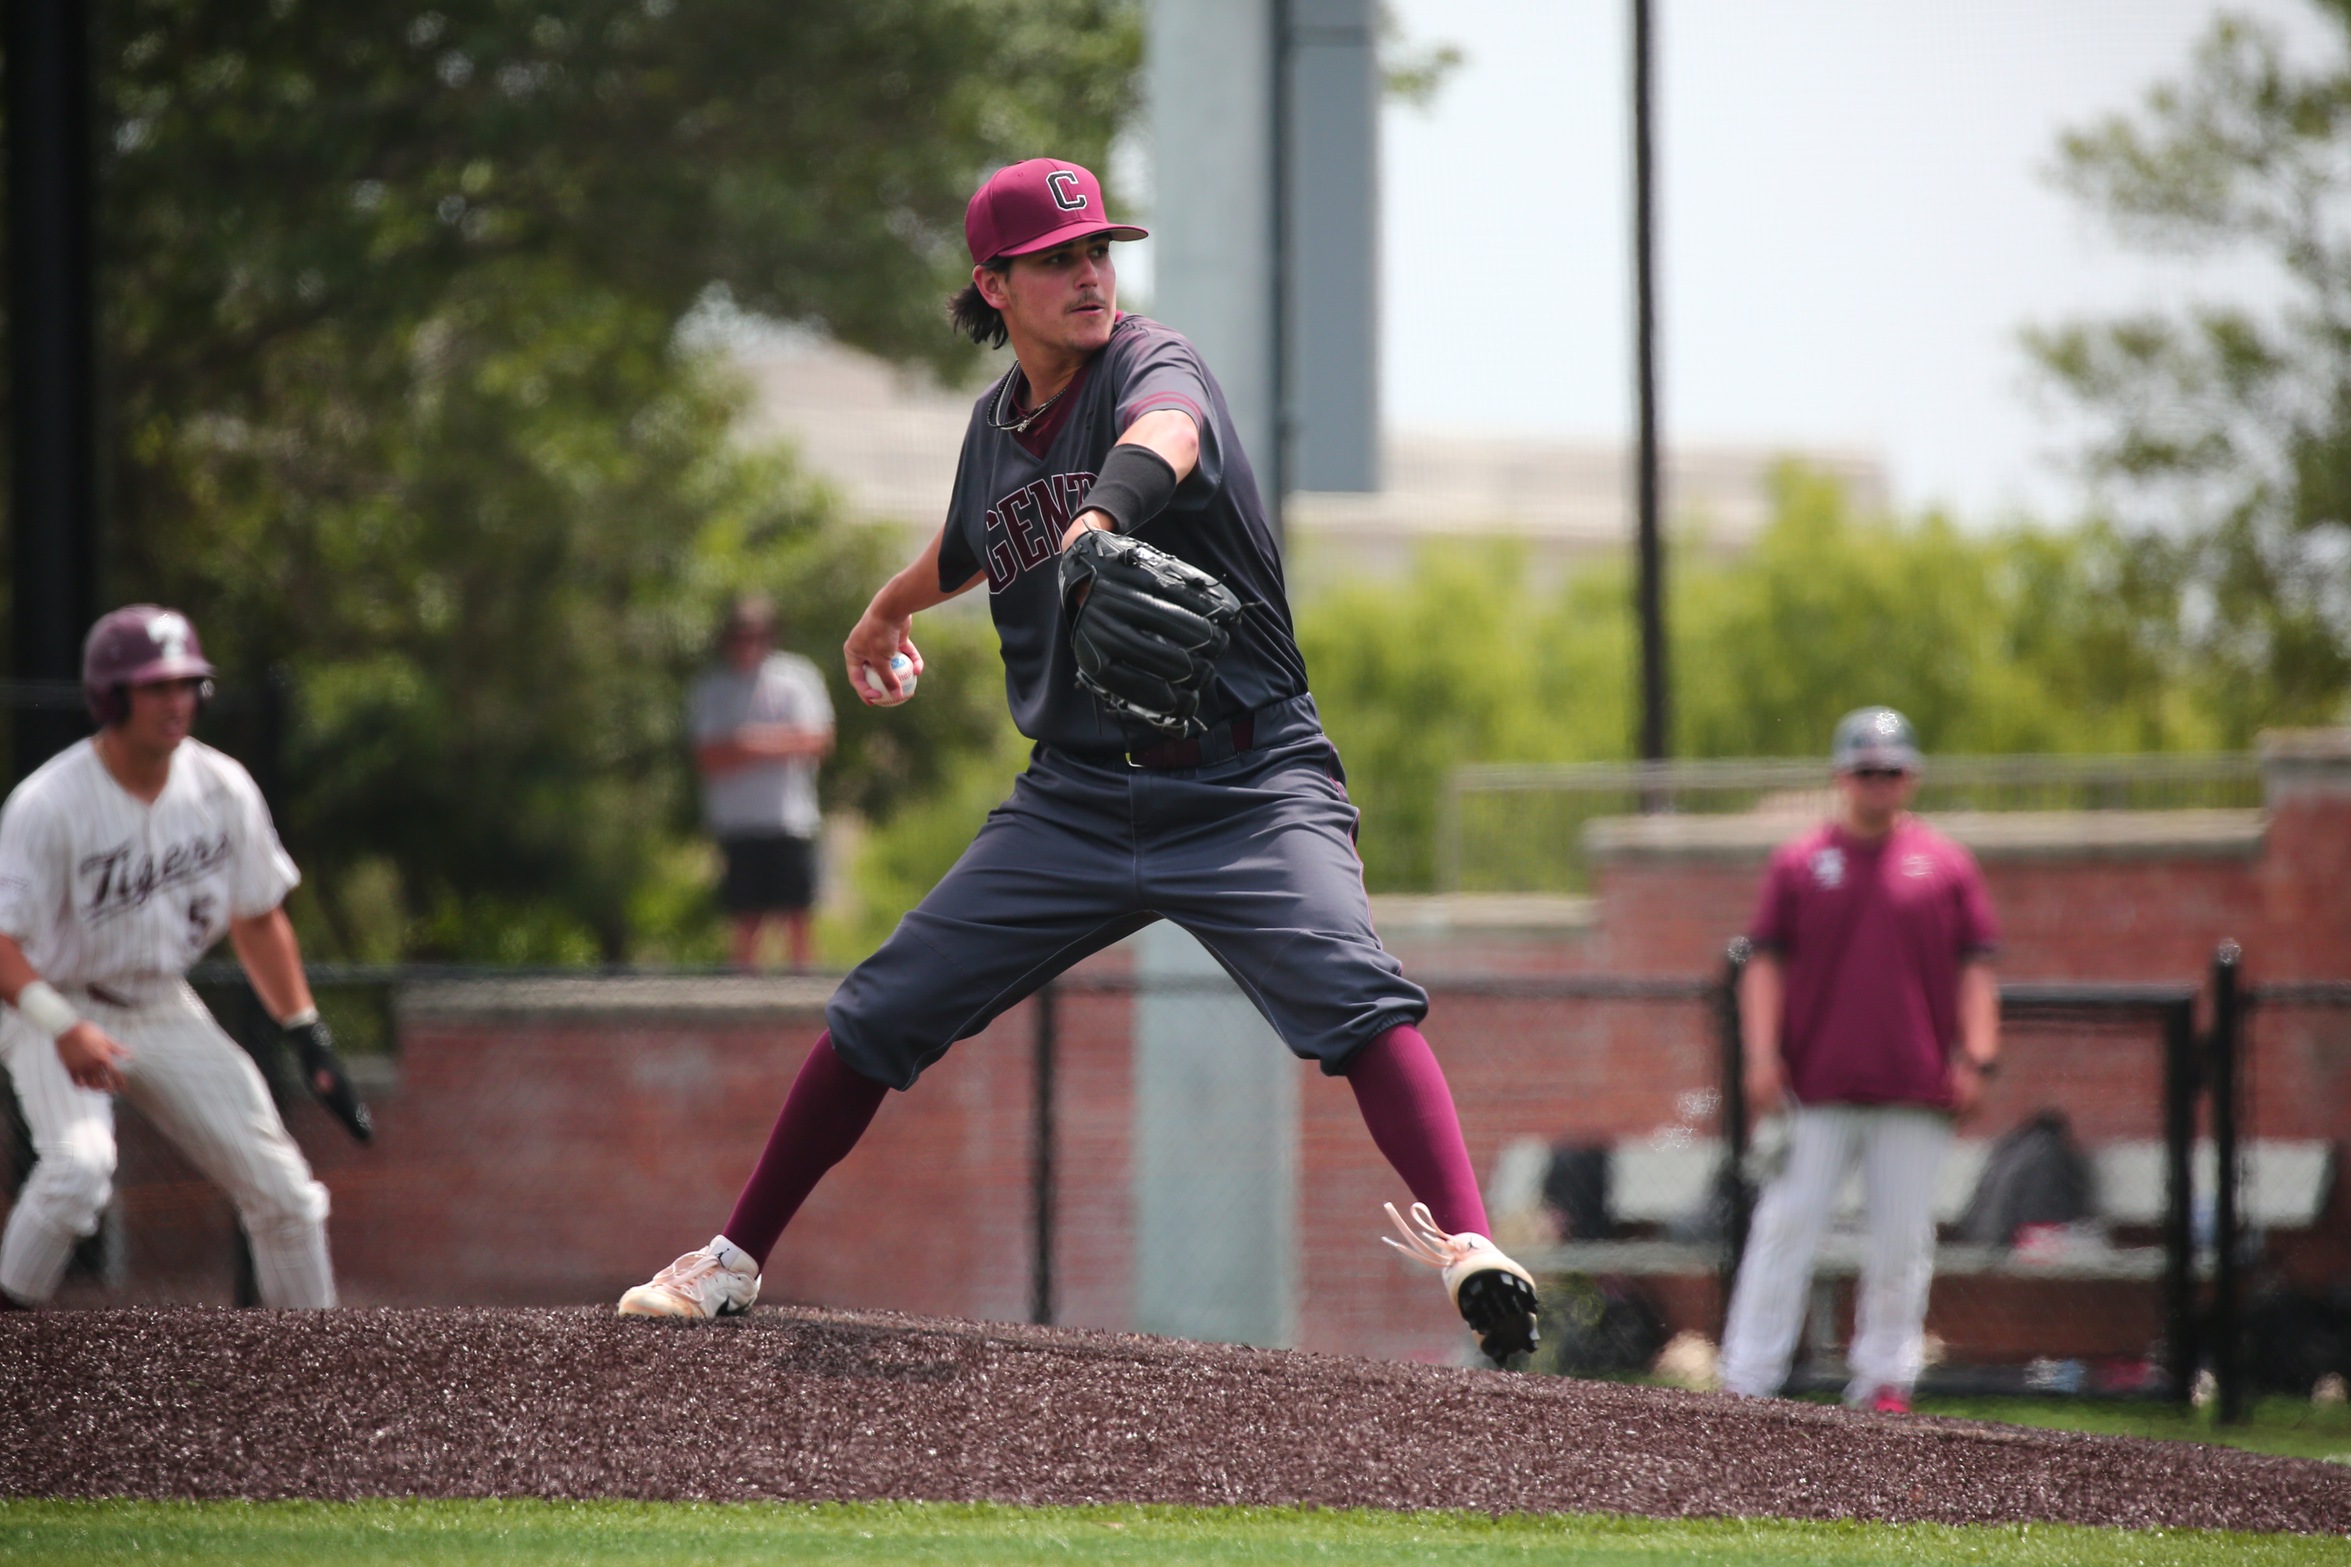 The Diamond Gents were swept in a DH on Saturday by the No. 24 Tigers. 

PHOTO: Avery Rosenblum, Trinity University Student